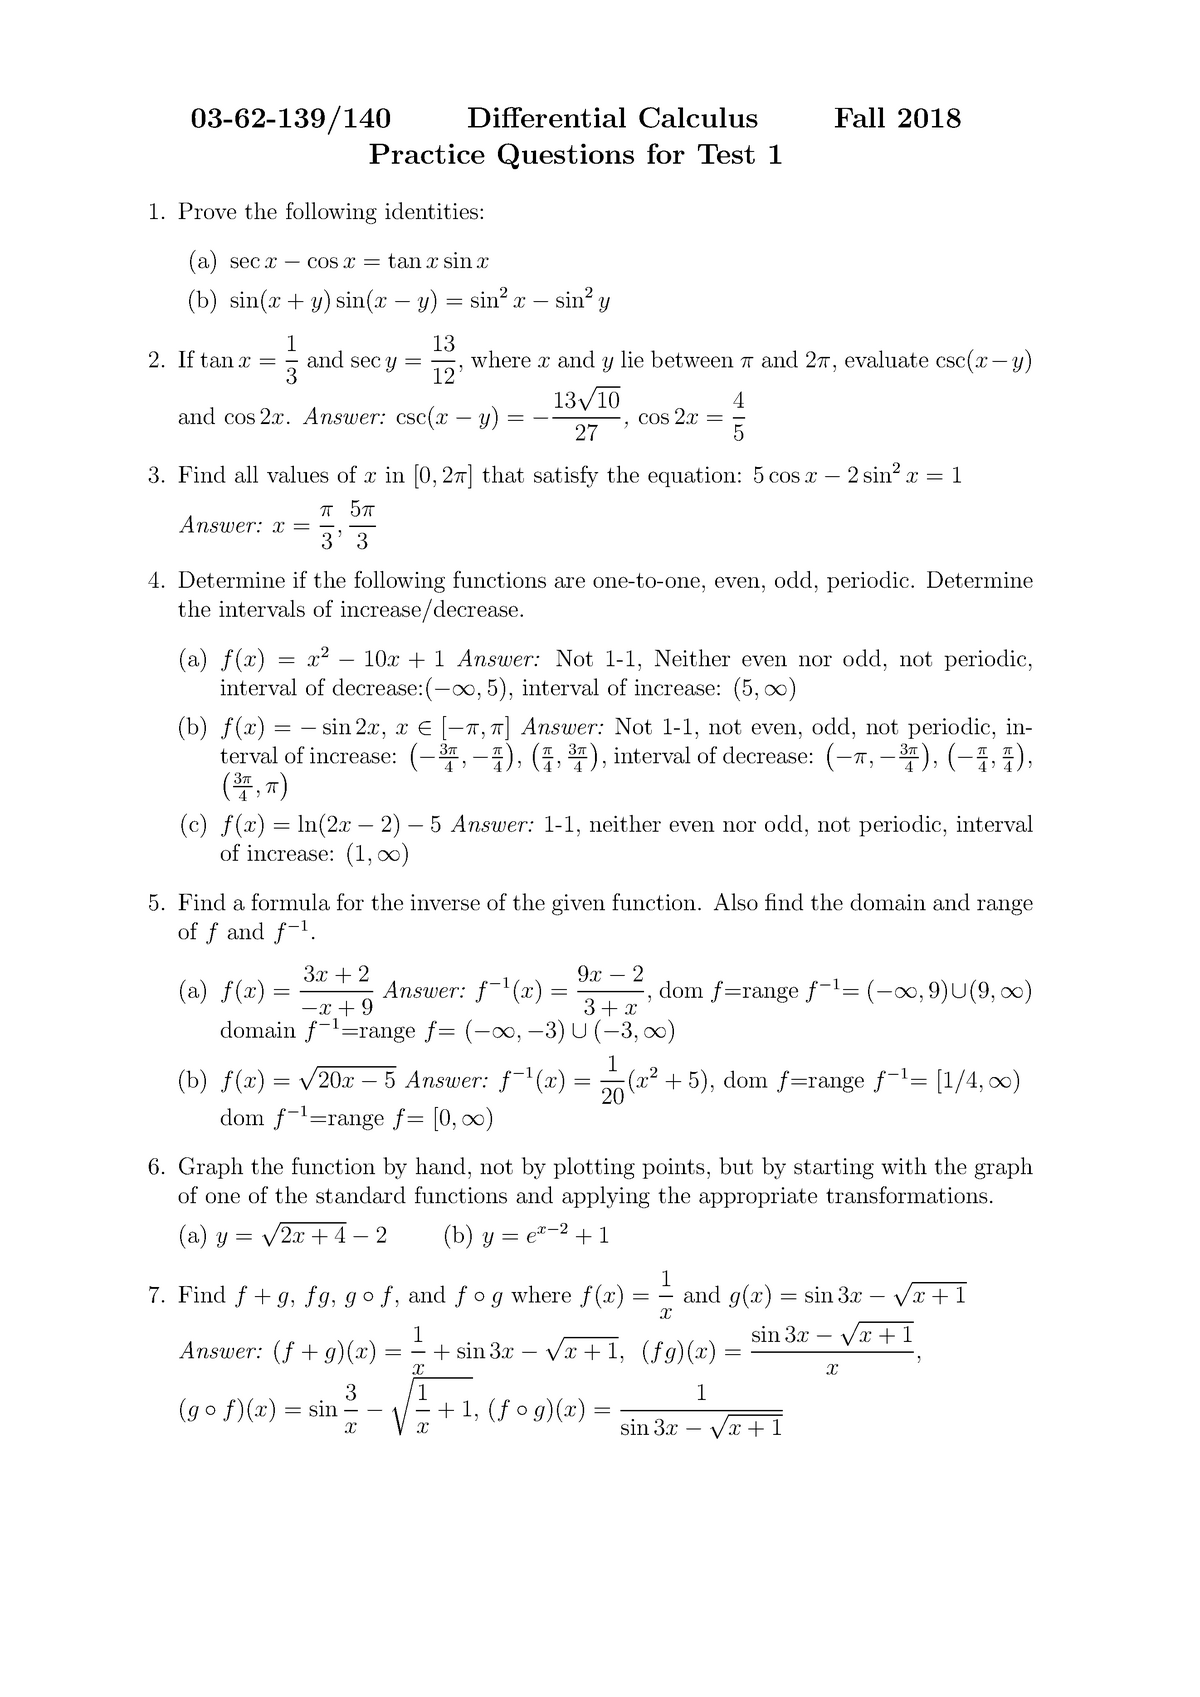 applications of differential calculus in various fields